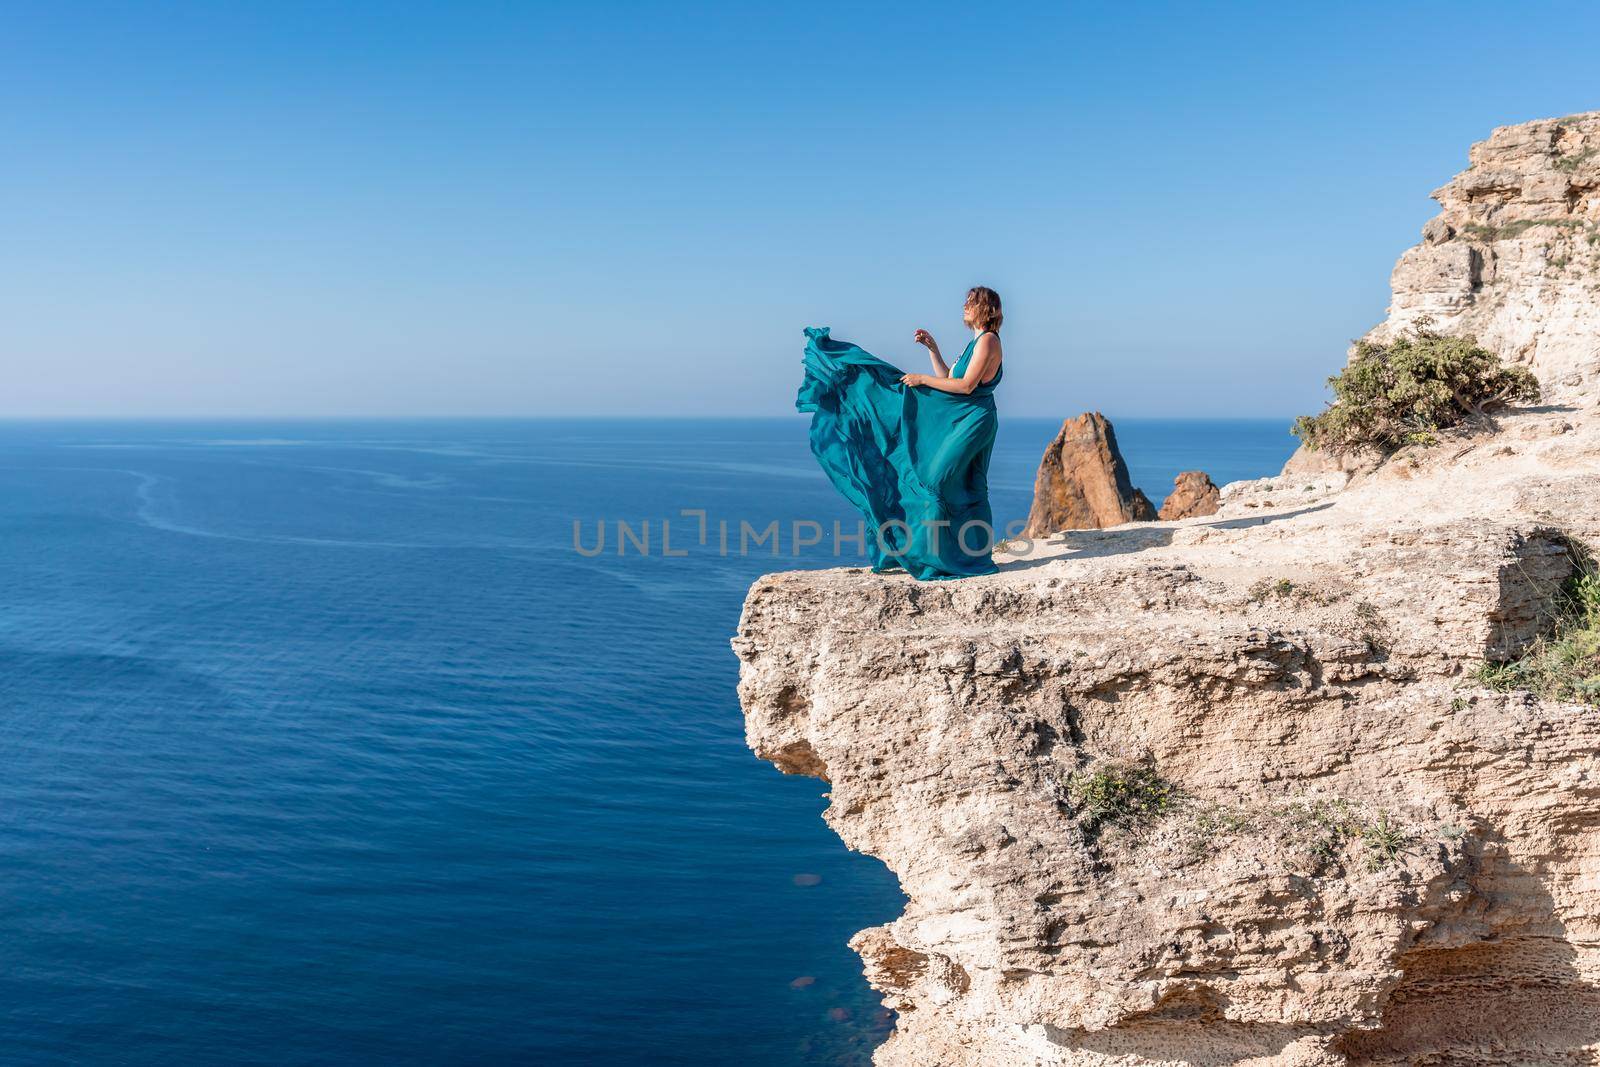 A girl with loose hair in a long mint dress descends the stairs between the yellow rocks overlooking the sea. A rock can be seen in the sea. Sunny path on the sea from the rising sun by Matiunina